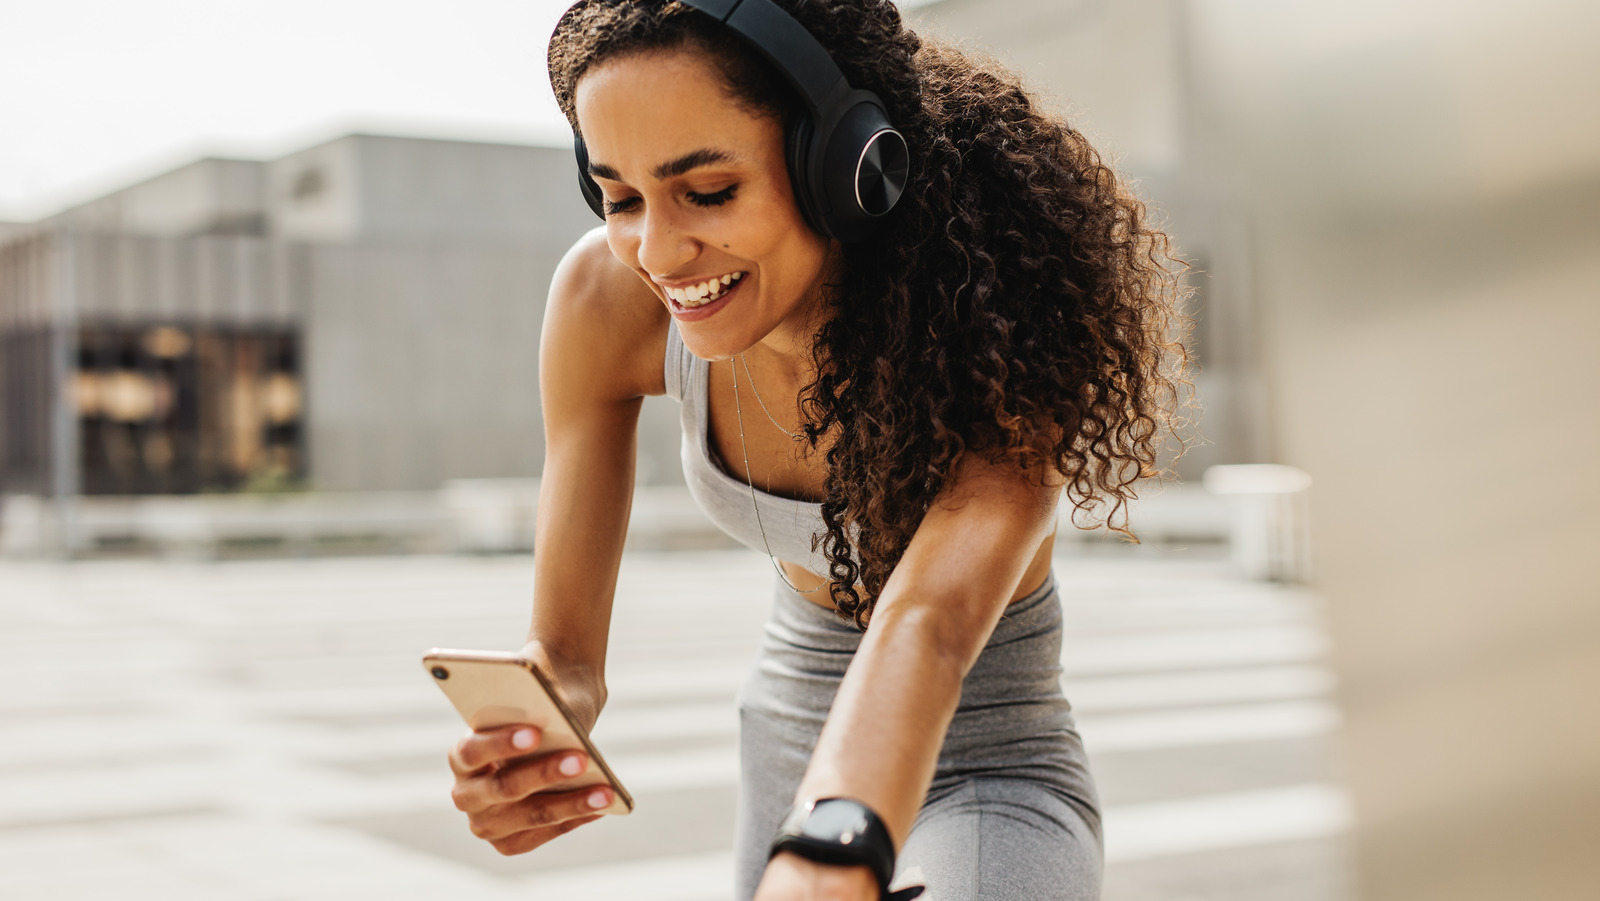 TikTok Shares 3 Easy Ways To Naturally Lower Your Cortisol Levels (But Do They Work? Here’s What We Know) – Health Digest